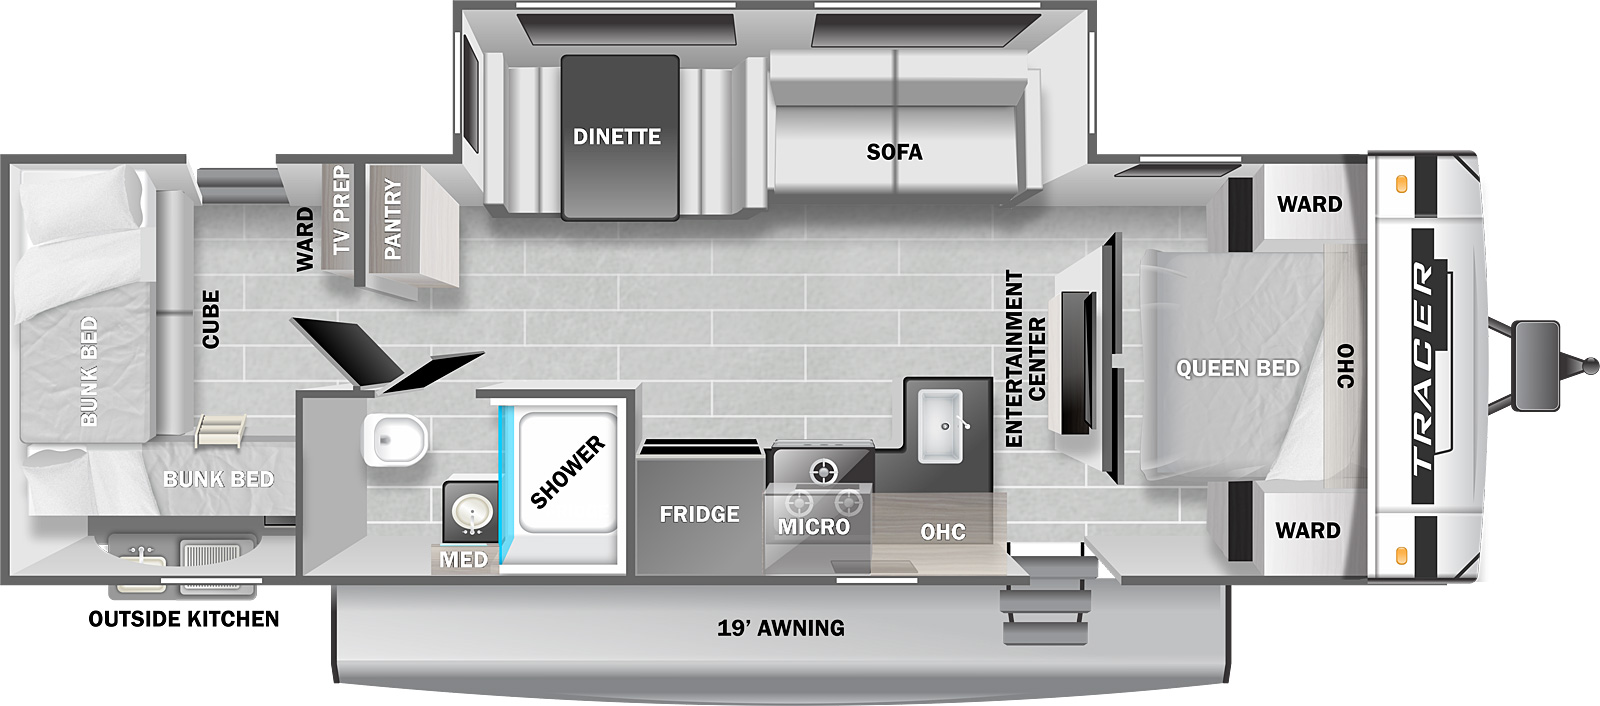 The Tracer 29QBD floorplan has one entry door, a 19 foot power awning, an outside kitchen with a sink and a grill, and one slideout. The entry door leads to the front bedroom on the right and a living area on the left. Directly to the left of the entry door is an L-shaped counter top with a sink and stove. A microwave is above the stove. Overhead storage is above the countertop to the right of the microwave. To the left of the countertop is a refrigerator. The rear wall of the living area leads to a bunk room in the rear of the RV. The bunk room has bunk beds on the door side and a cube sofa with a bunk bed above in the rear. The front of the bunk room has a wardrobe with TV prep in the front off door side corner and a door in the middle. The door leads to a bathroom door on the right and the living area on the left. The bathroom has a toilet, a sink with a medicine cabinet above and a shower. Back in the living area, the rear off door corner has a pantry. The off door side slideout is to the right of the pantry. The slideout has a booth dinette and a sofa. The front wall of the living area has an entertainment center. Sliding doors are on the left and right of the entertainment center. The sliding doors both lead to the bedroom. The bedroom has a queen bed with a wardrobe and night stand on the right and left and overhead storage above.